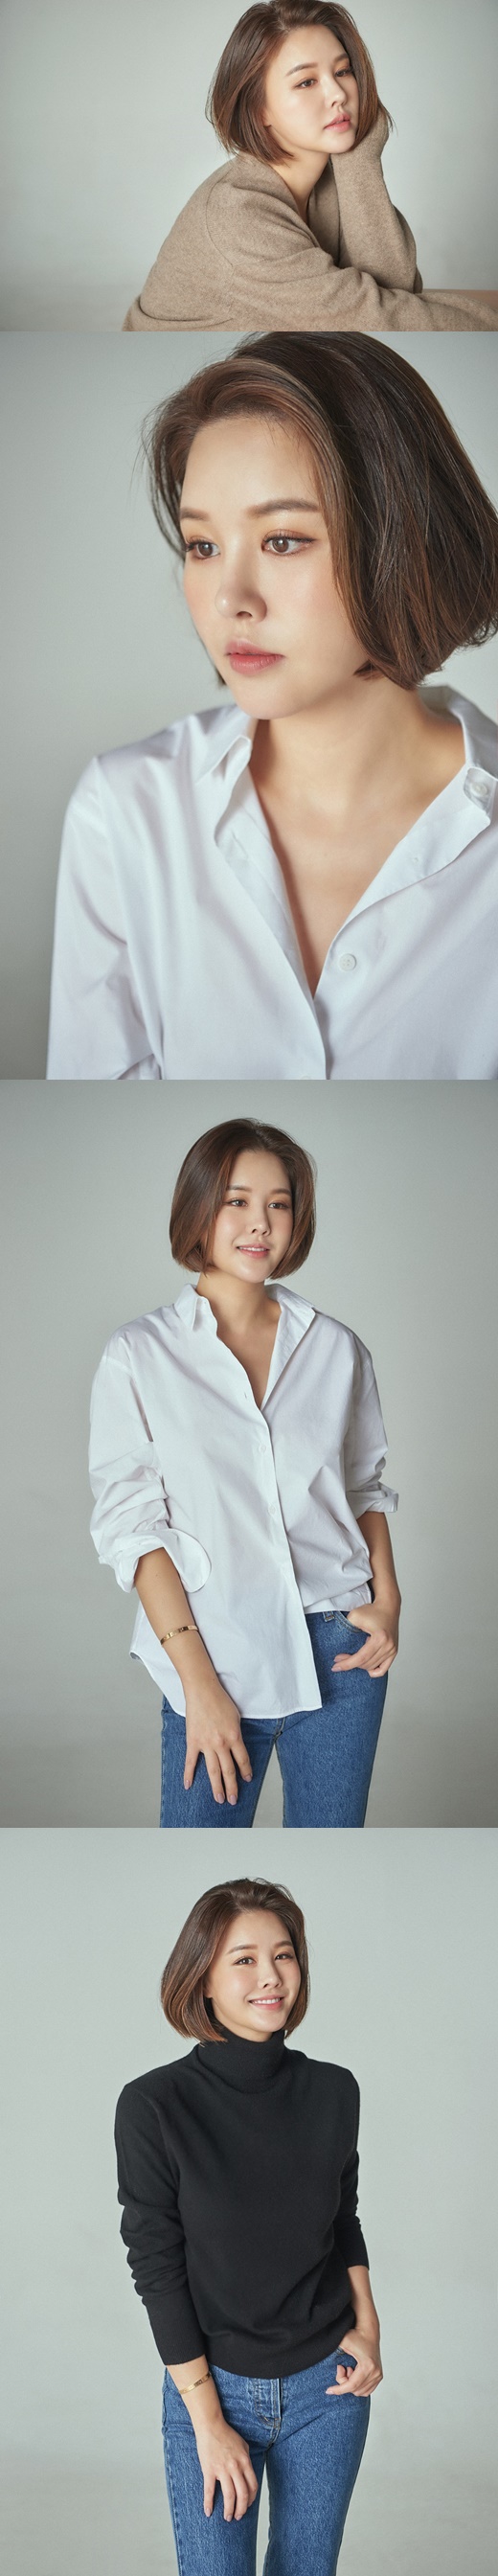 Broadcaster Park Eun-ji has unveiled a new profile.Lynn Branding, a subsidiary company, showed off new profile photos of Park Eun-ji on the morning of the 11th.Park Eun-ji in the photo shows a unique presence with various charms ranging from fresh smile to alluring eyes.In particular, Park Eun-ji has attracted attention with his distinctive features despite his natural makeup. He has chic with white shirts and jeans. He has elegance but sophisticated atmosphere with knit, and he has perfected makeup to fashion and showed cool.In addition, Park Eun-ji showed not only hair to makeup directly on the day of shooting, but also various poses and facial expressions.Since then, he has been able to communicate his makeup process and beauty know-how as well as fashion, life, and philosophy honestly and honestly, and has also established himself as an entertainers first beauty creator.Recently, SNS has expanded its activities as an influencer that completes cosmetics, inner beauty, beverages, and accessories, which are products used by the user, and is attracting attention from industry officials as a move that is in line with the rapidly changing digital media market trend.